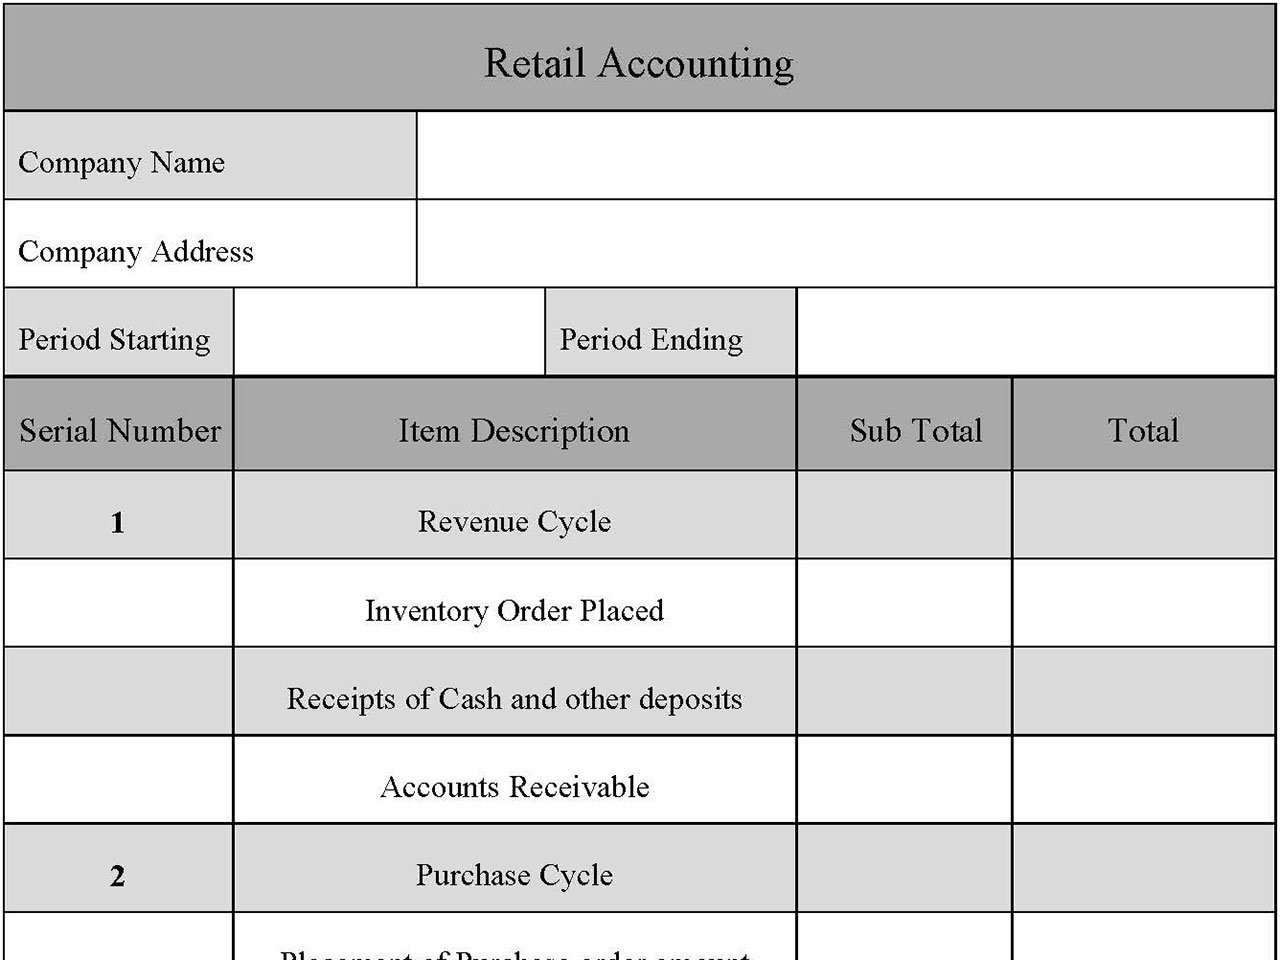 Retail Accounting Form